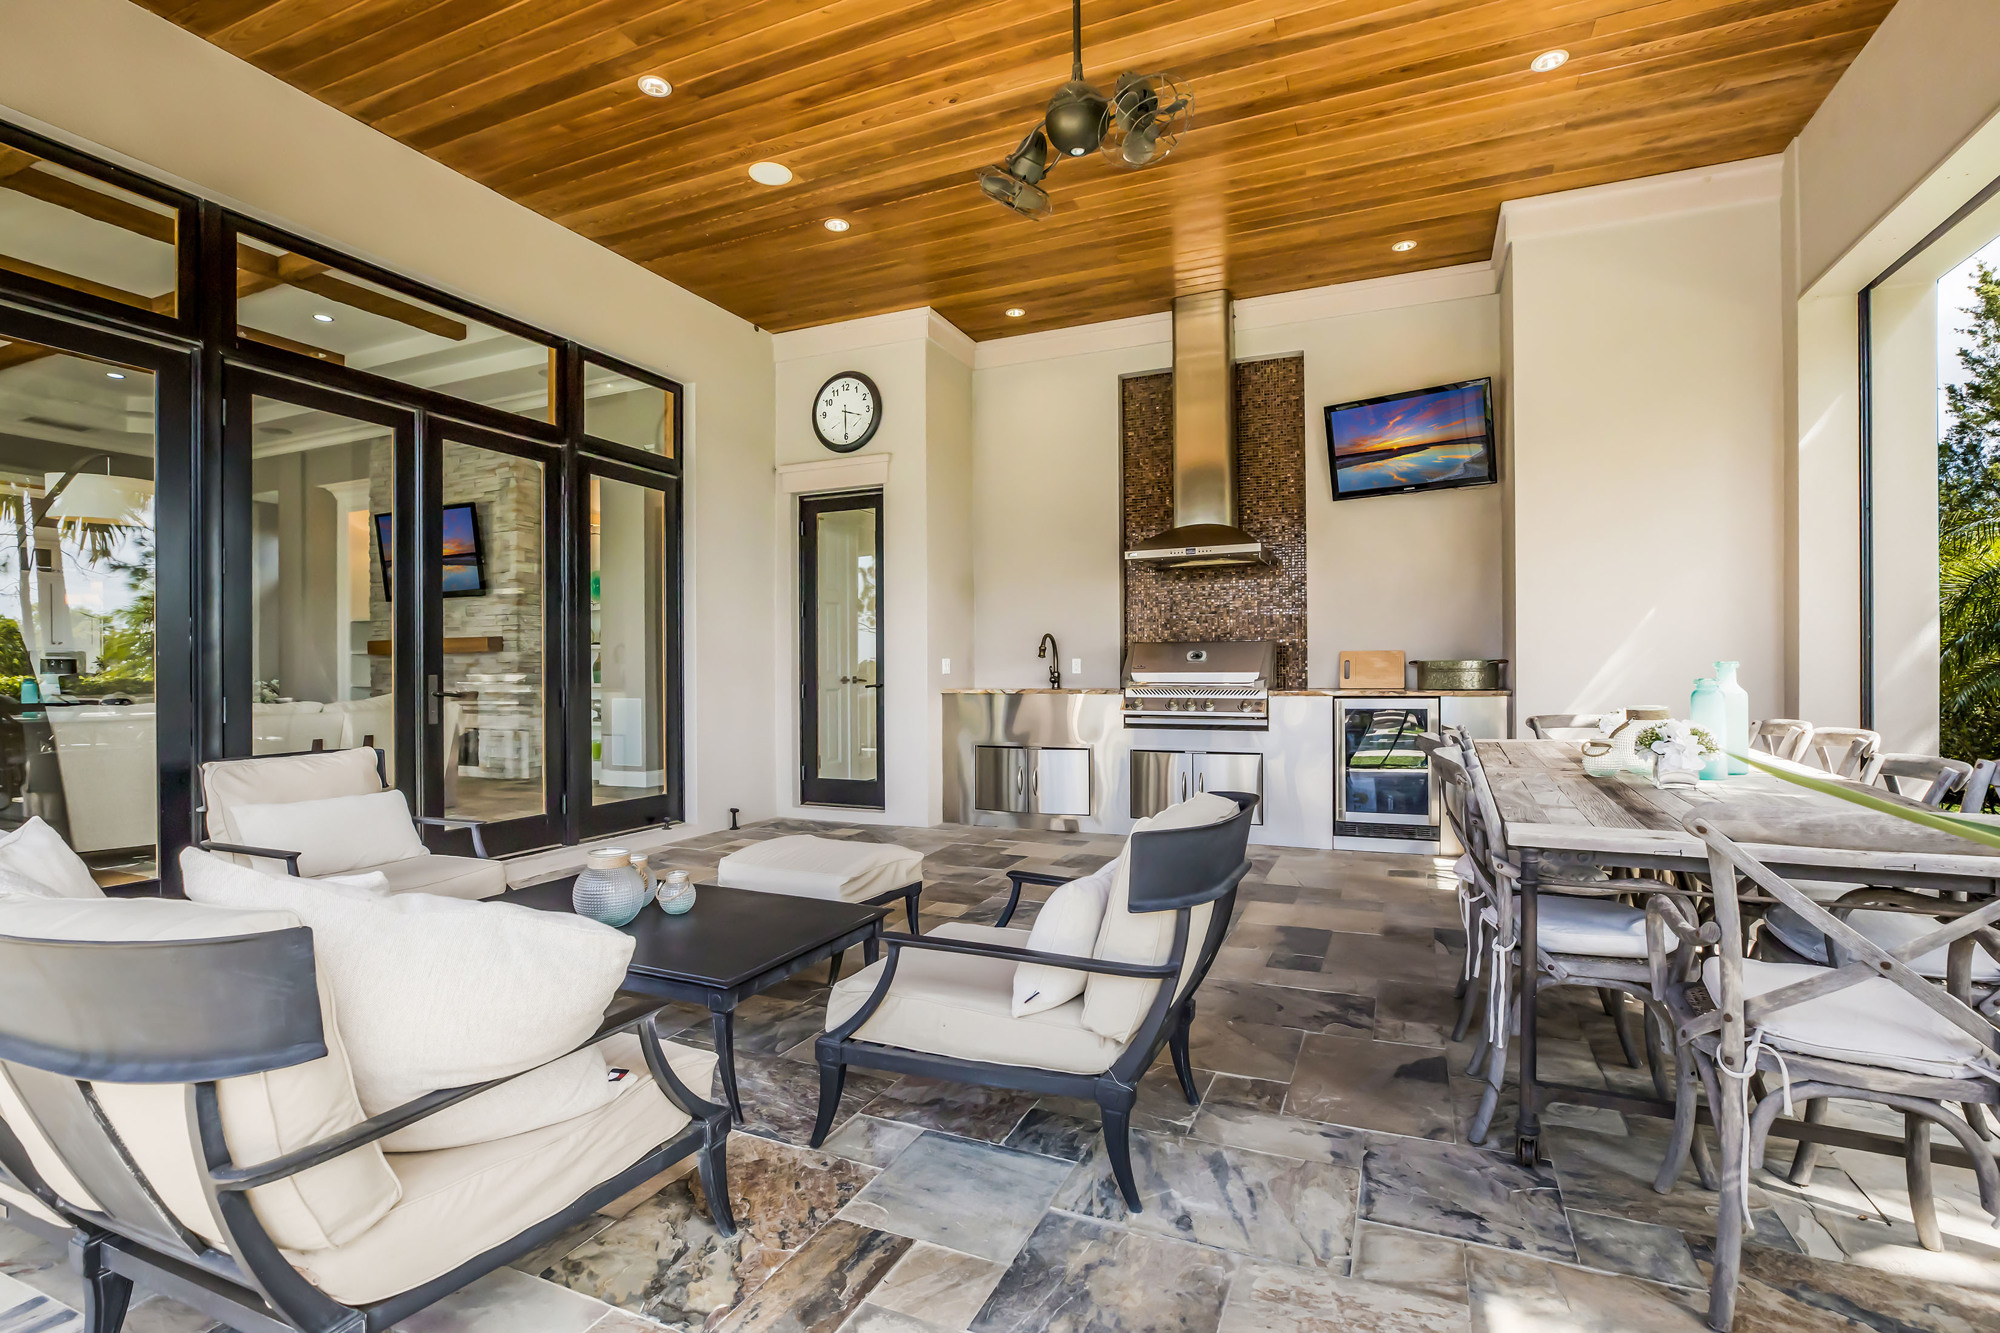 The outdoor living area contains all the comforts of the indoors, including a kitchen, fireplace and television. Screens can be lowered at the touch of a button.